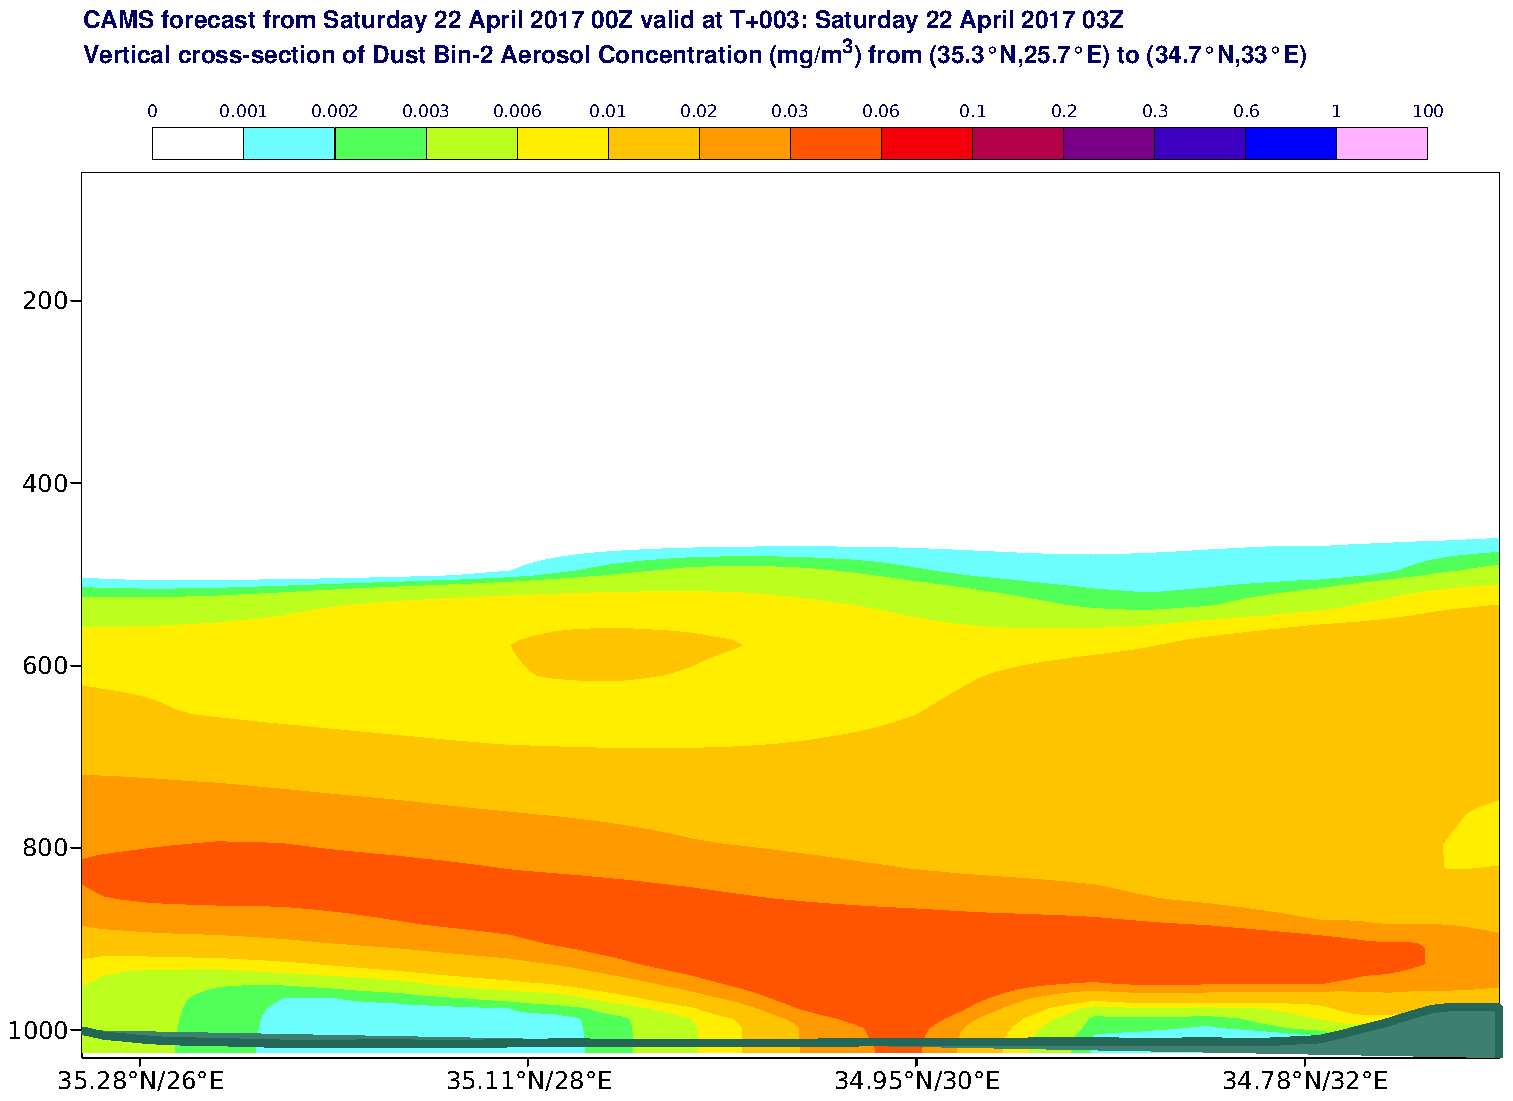 Vertical cross-section of Dust Bin-2 Aerosol Concentration (mg/m3) valid at T3 - 2017-04-22 03:00